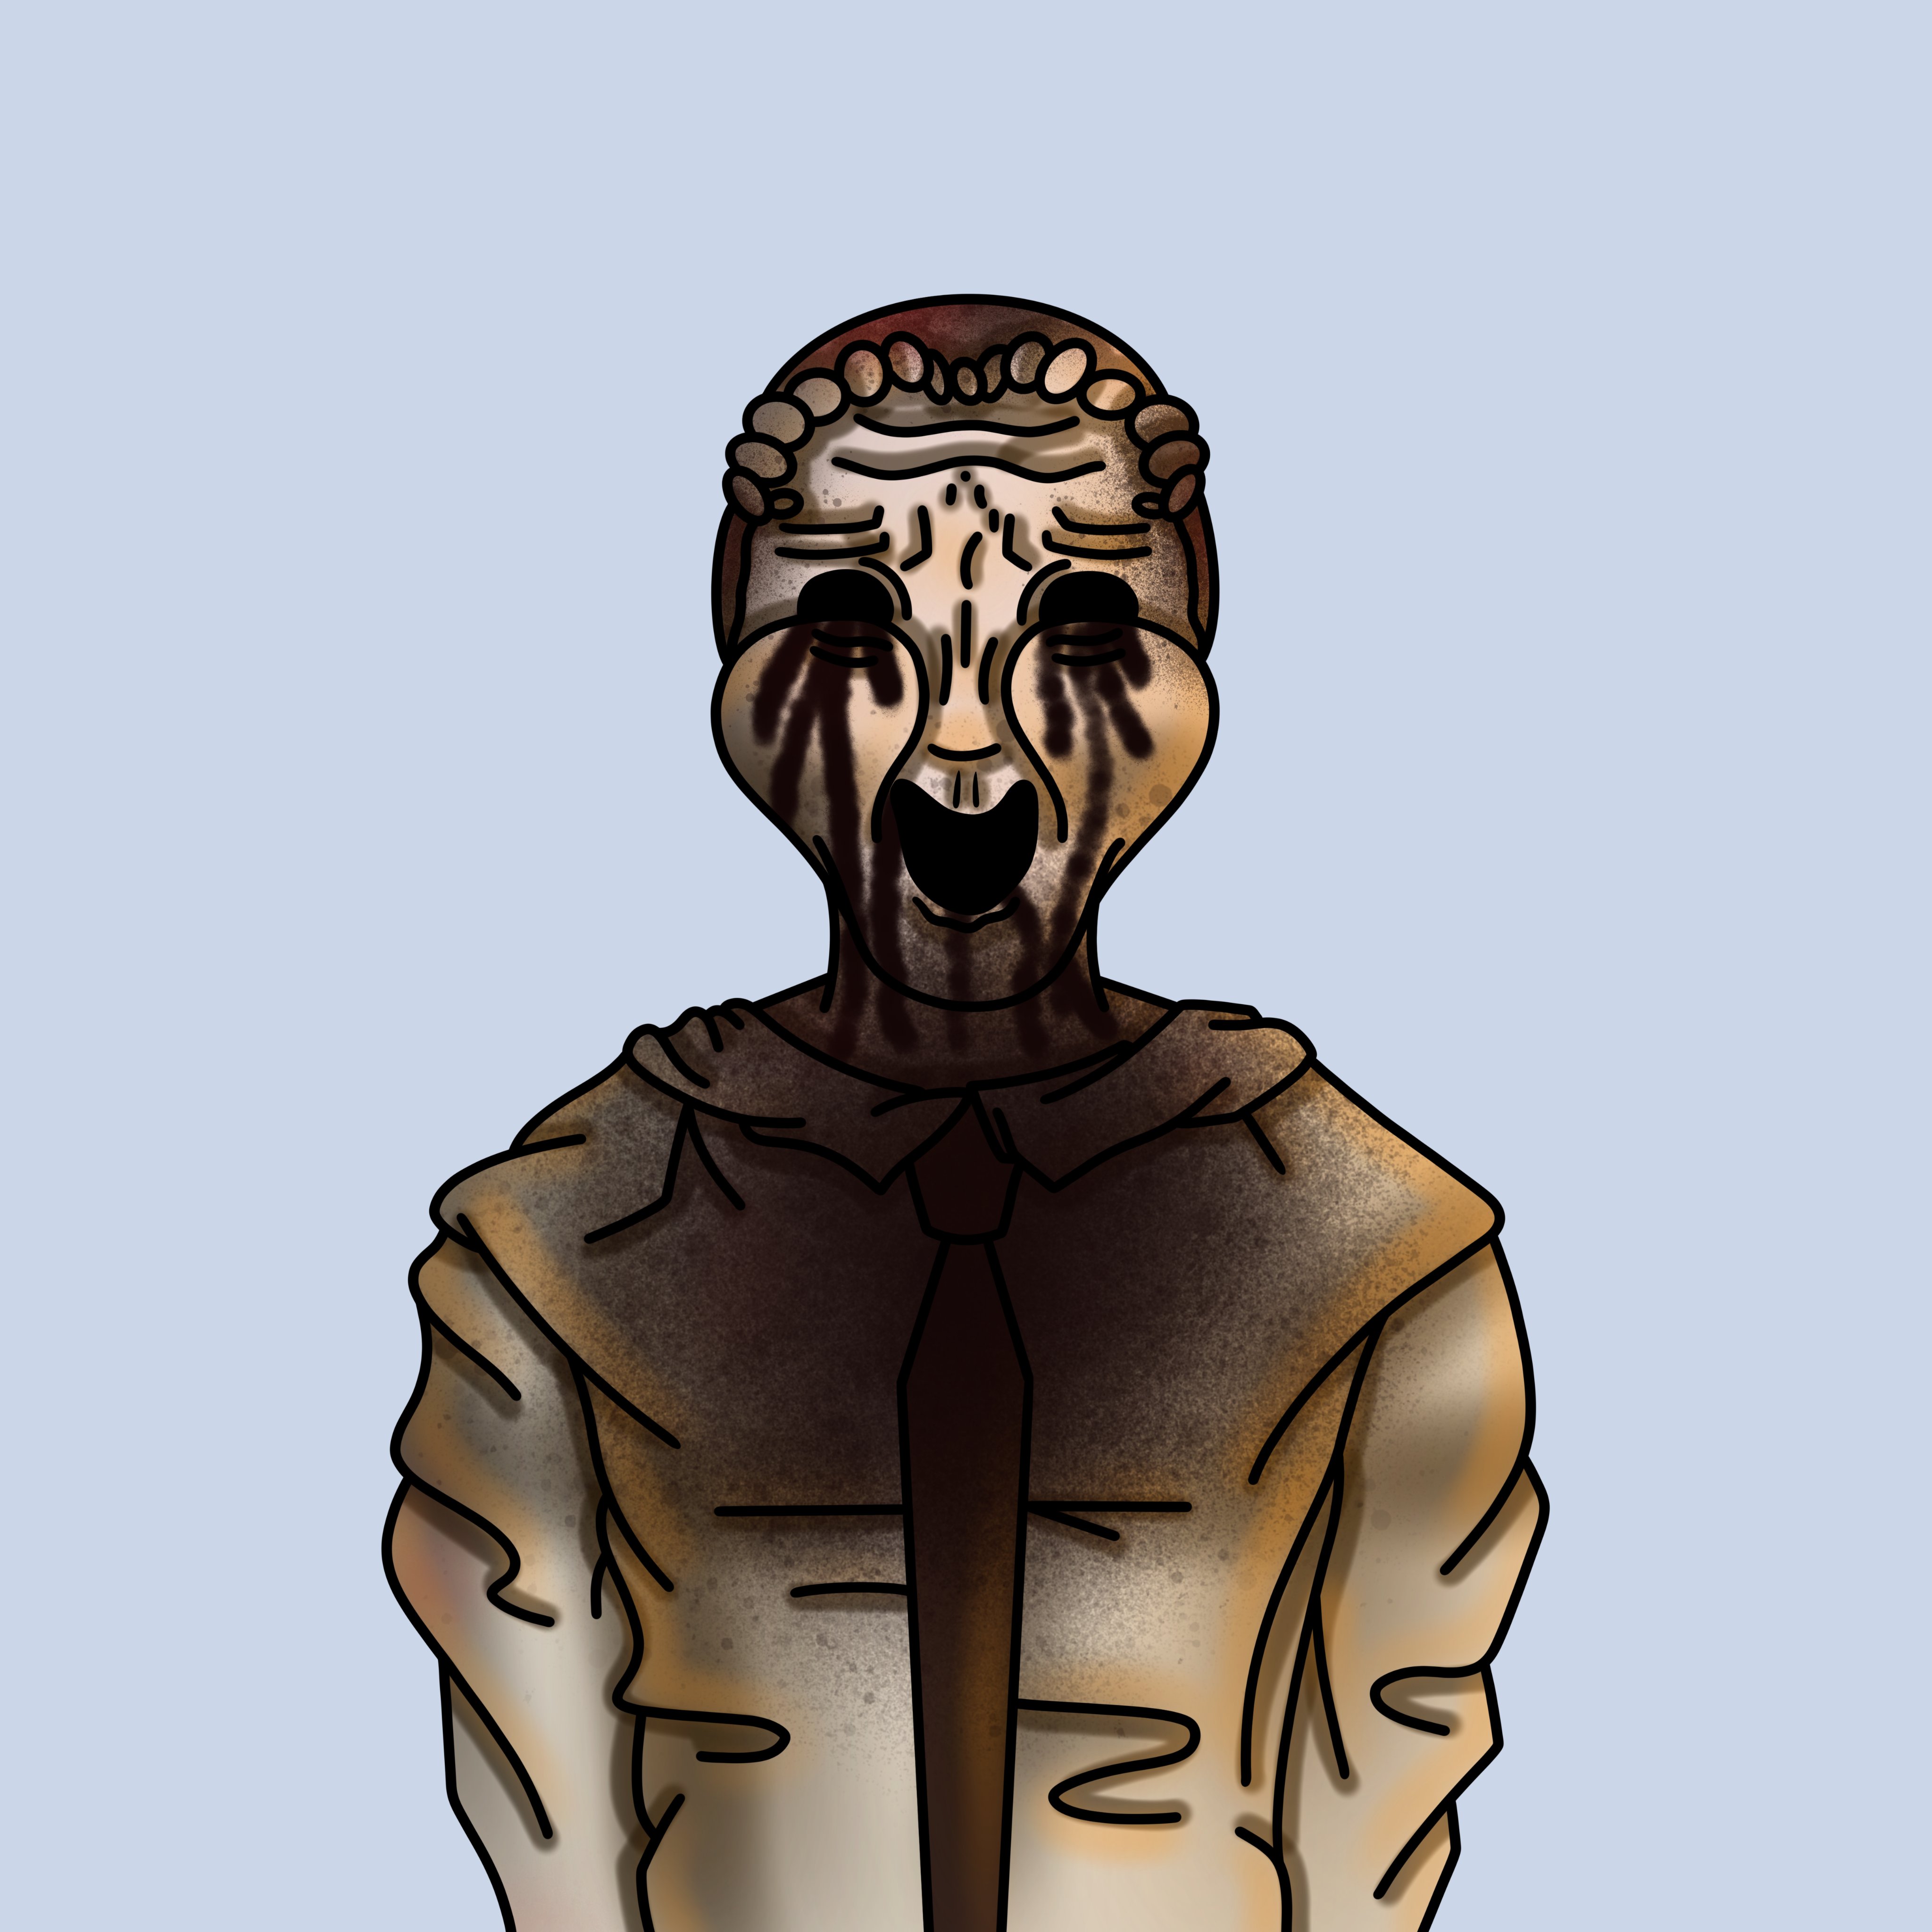 ArtMeExpress on X: So today I decided to draw SCP-035